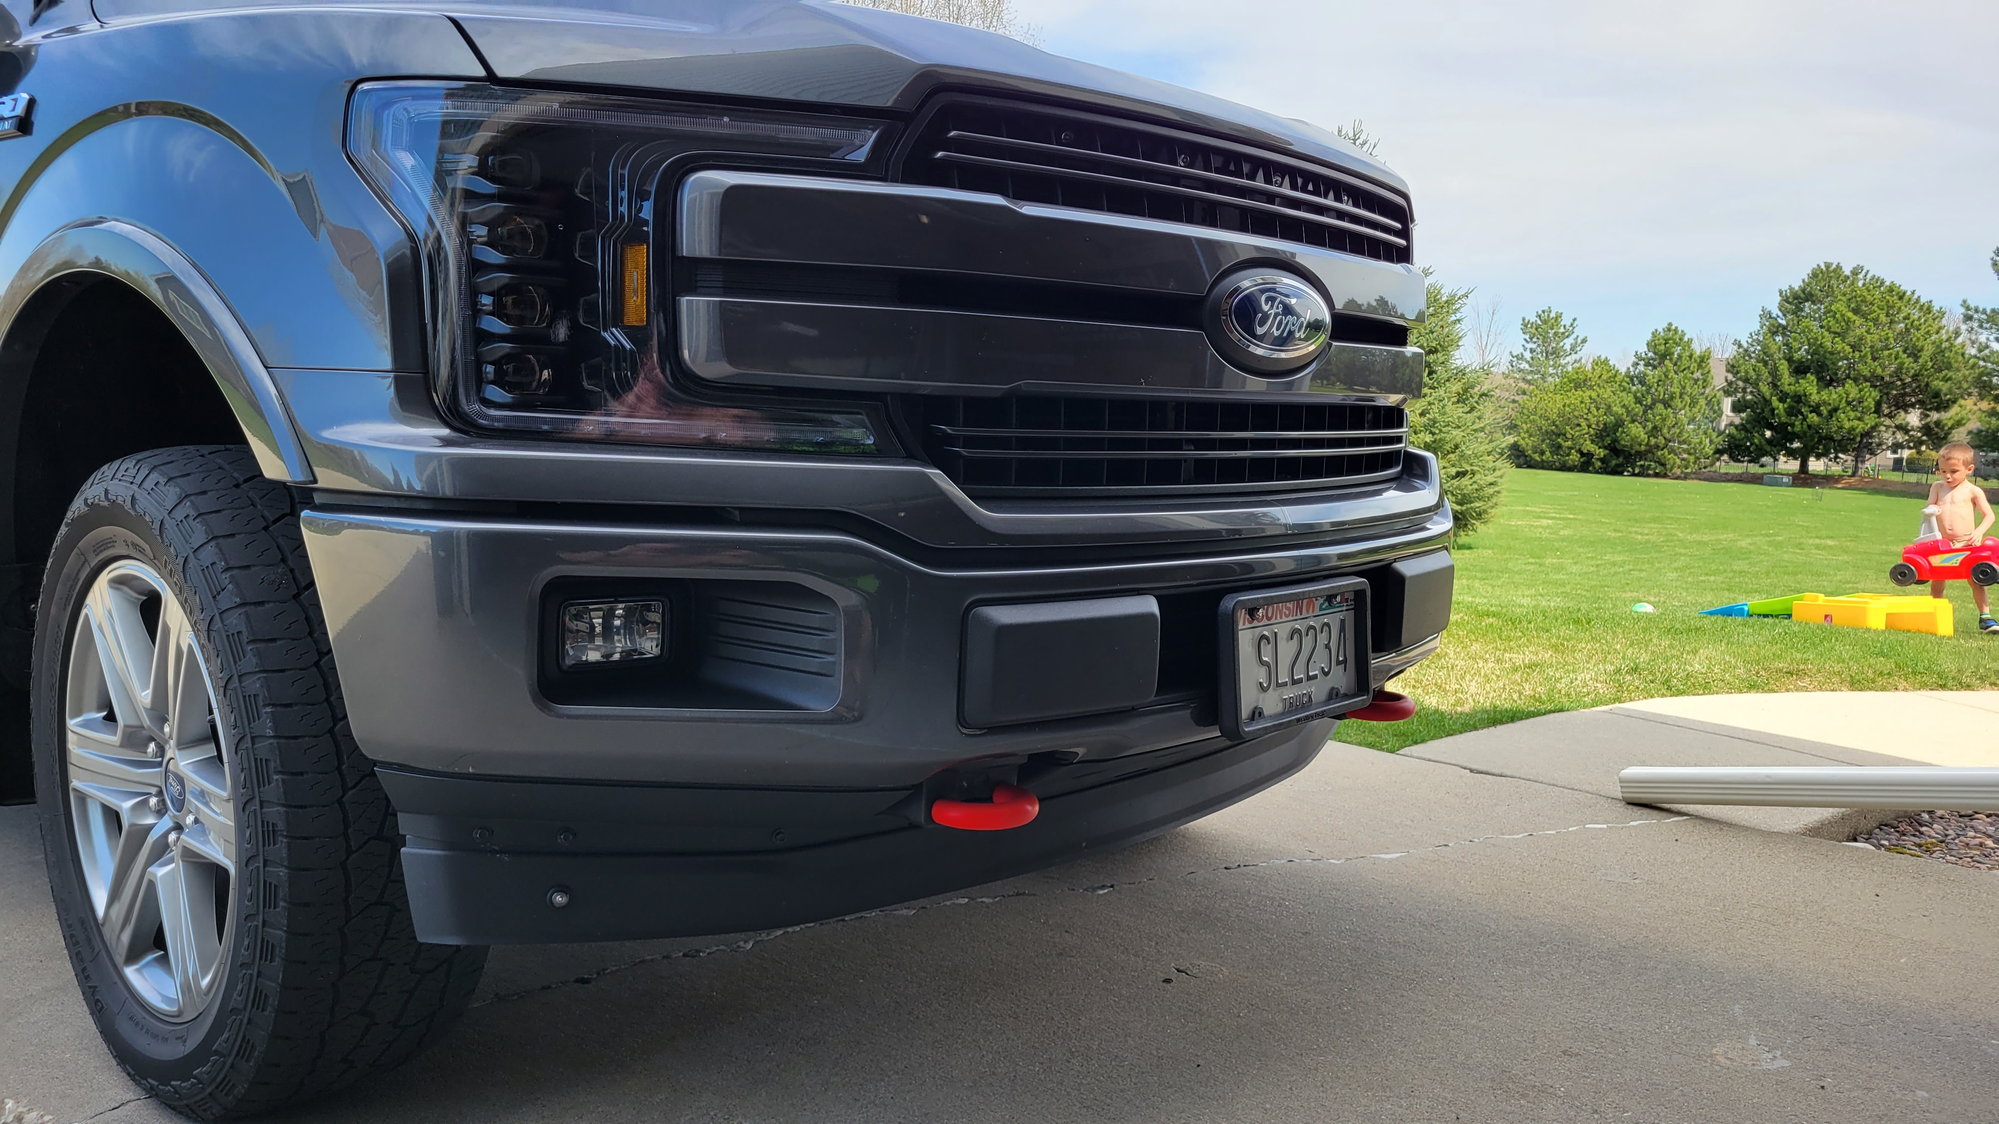 Towkz Tow Hook Covers - Ford F150 Forum - Community of Ford Truck Fans